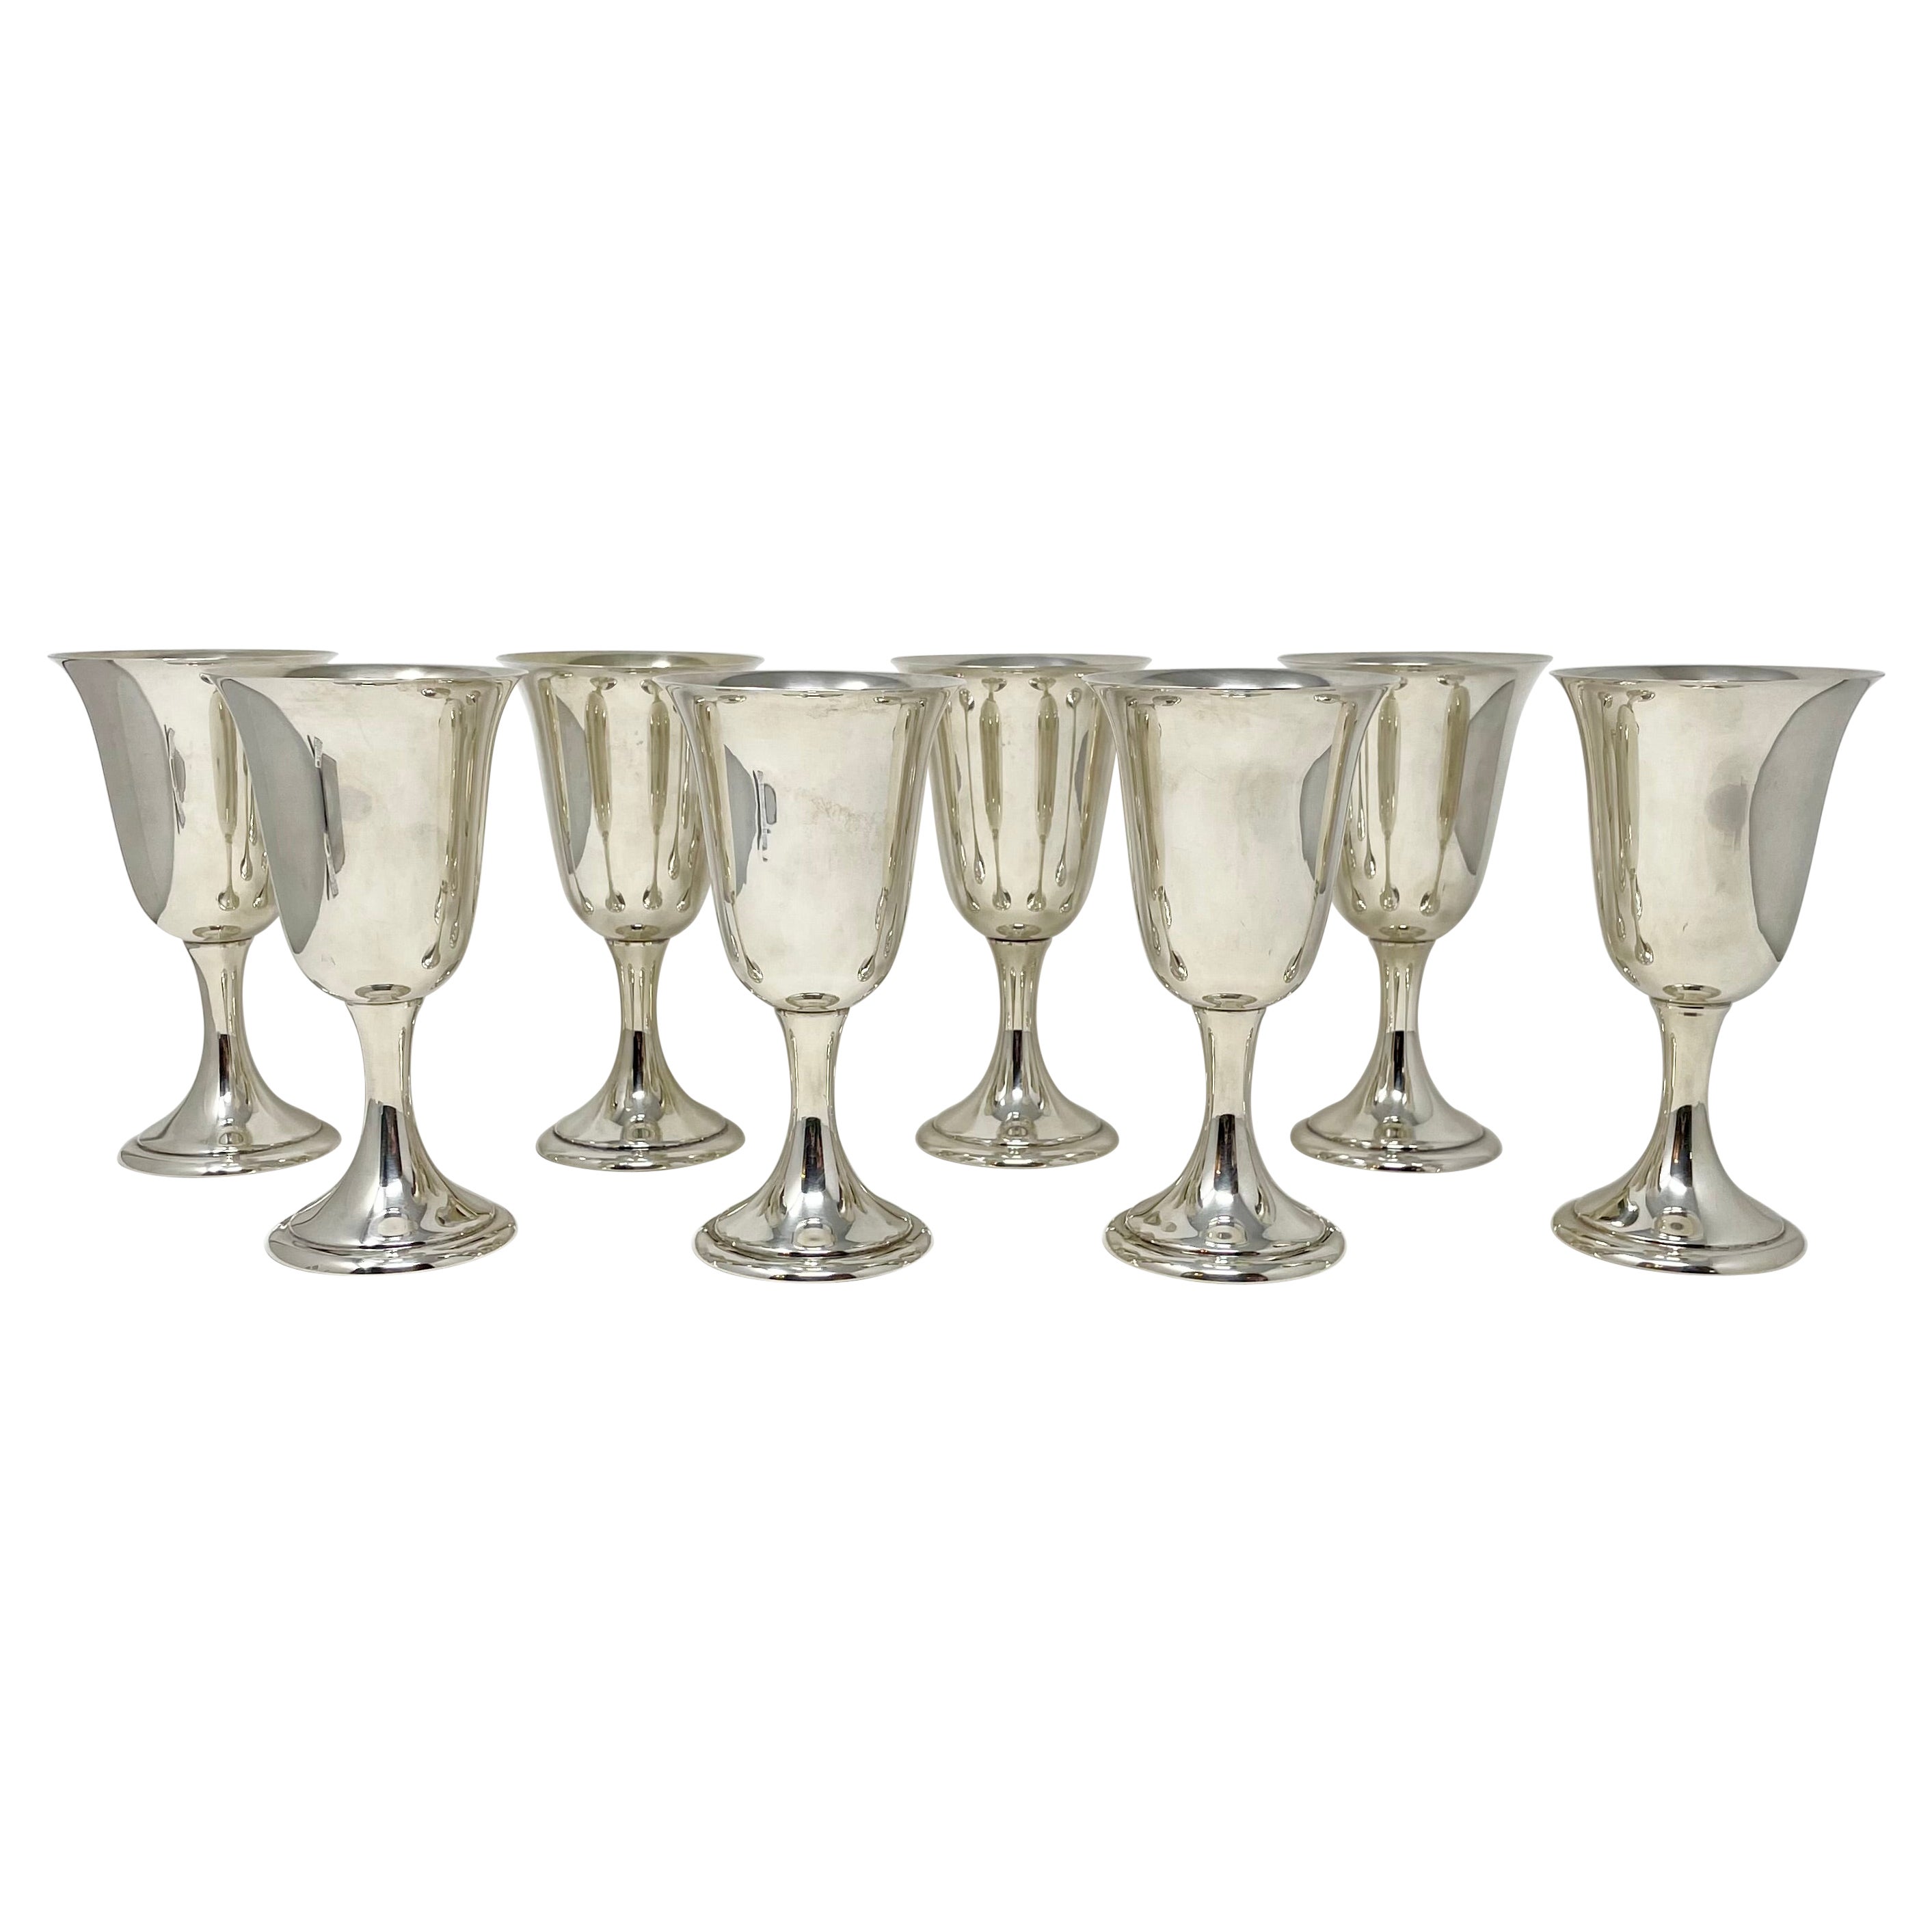 Set of 8 Estate Italian Sterling Silver Wine or Water Goblets circa 1950-1960